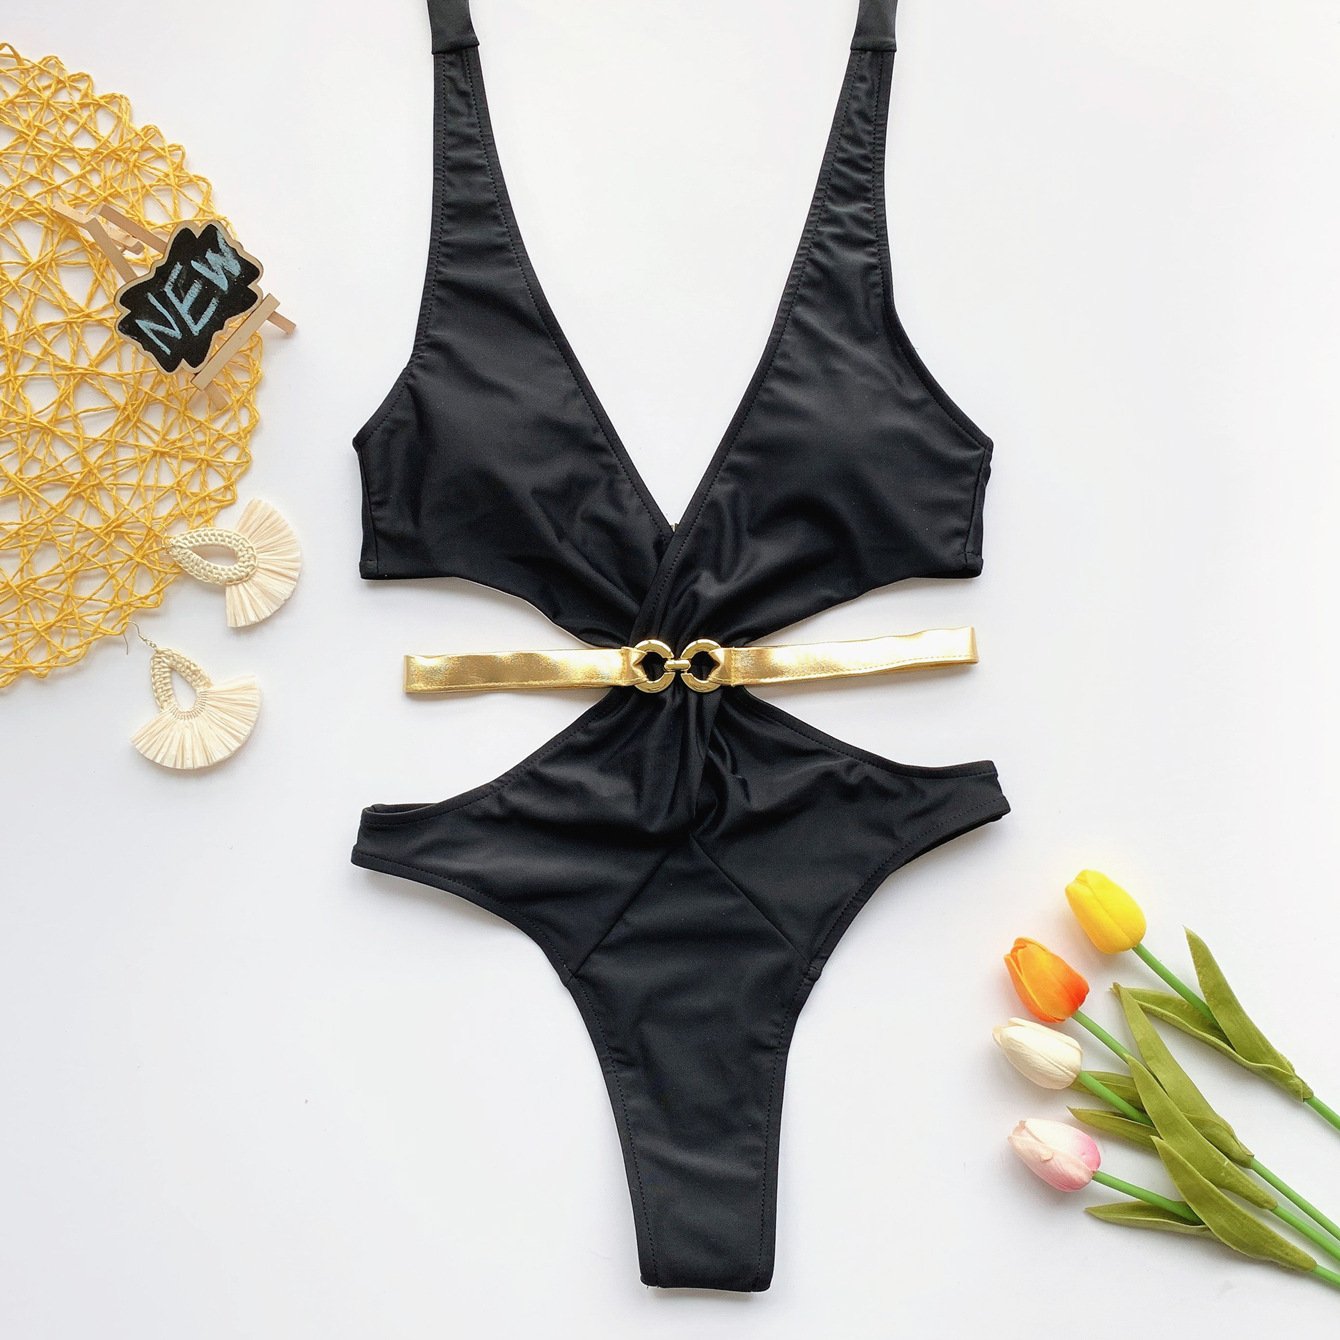 Black Halter Strappy Cutout High Cut Swimsuit